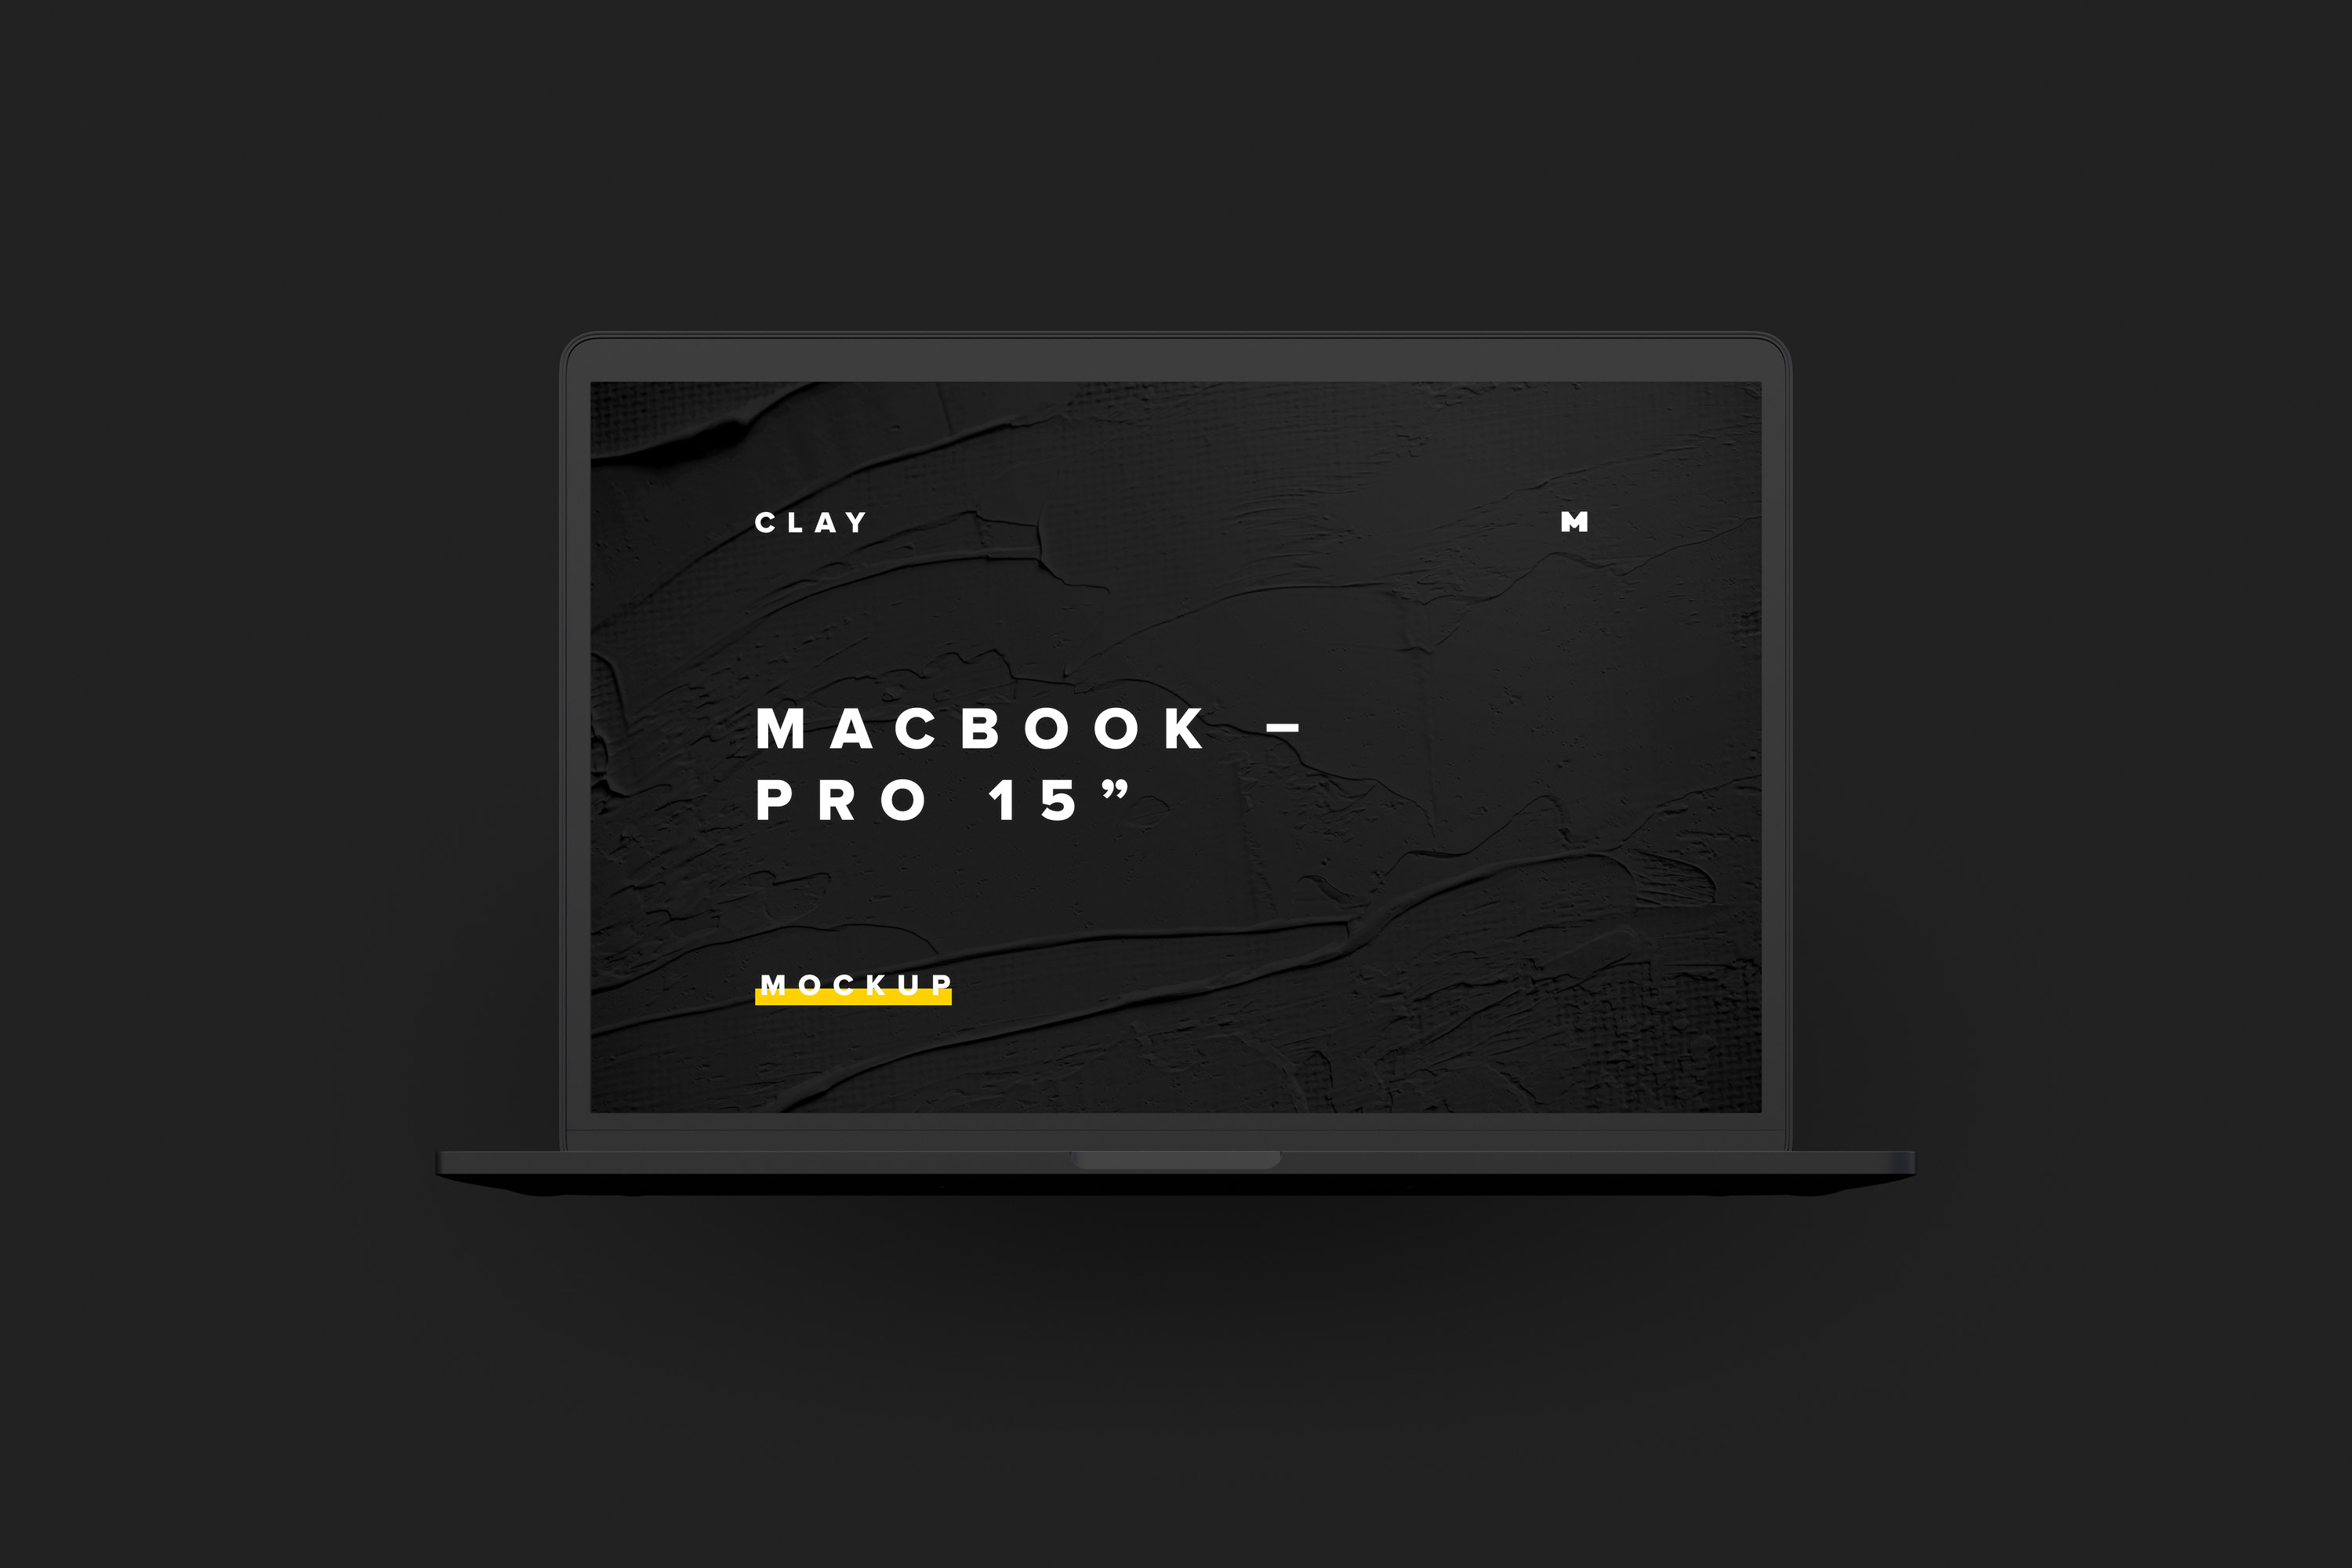 MacBook Pro高端笔记本电脑UI设计效果图前视图样机 Clay MacBook Pro 15" with Touch Bar, Front View Mockup插图(5)